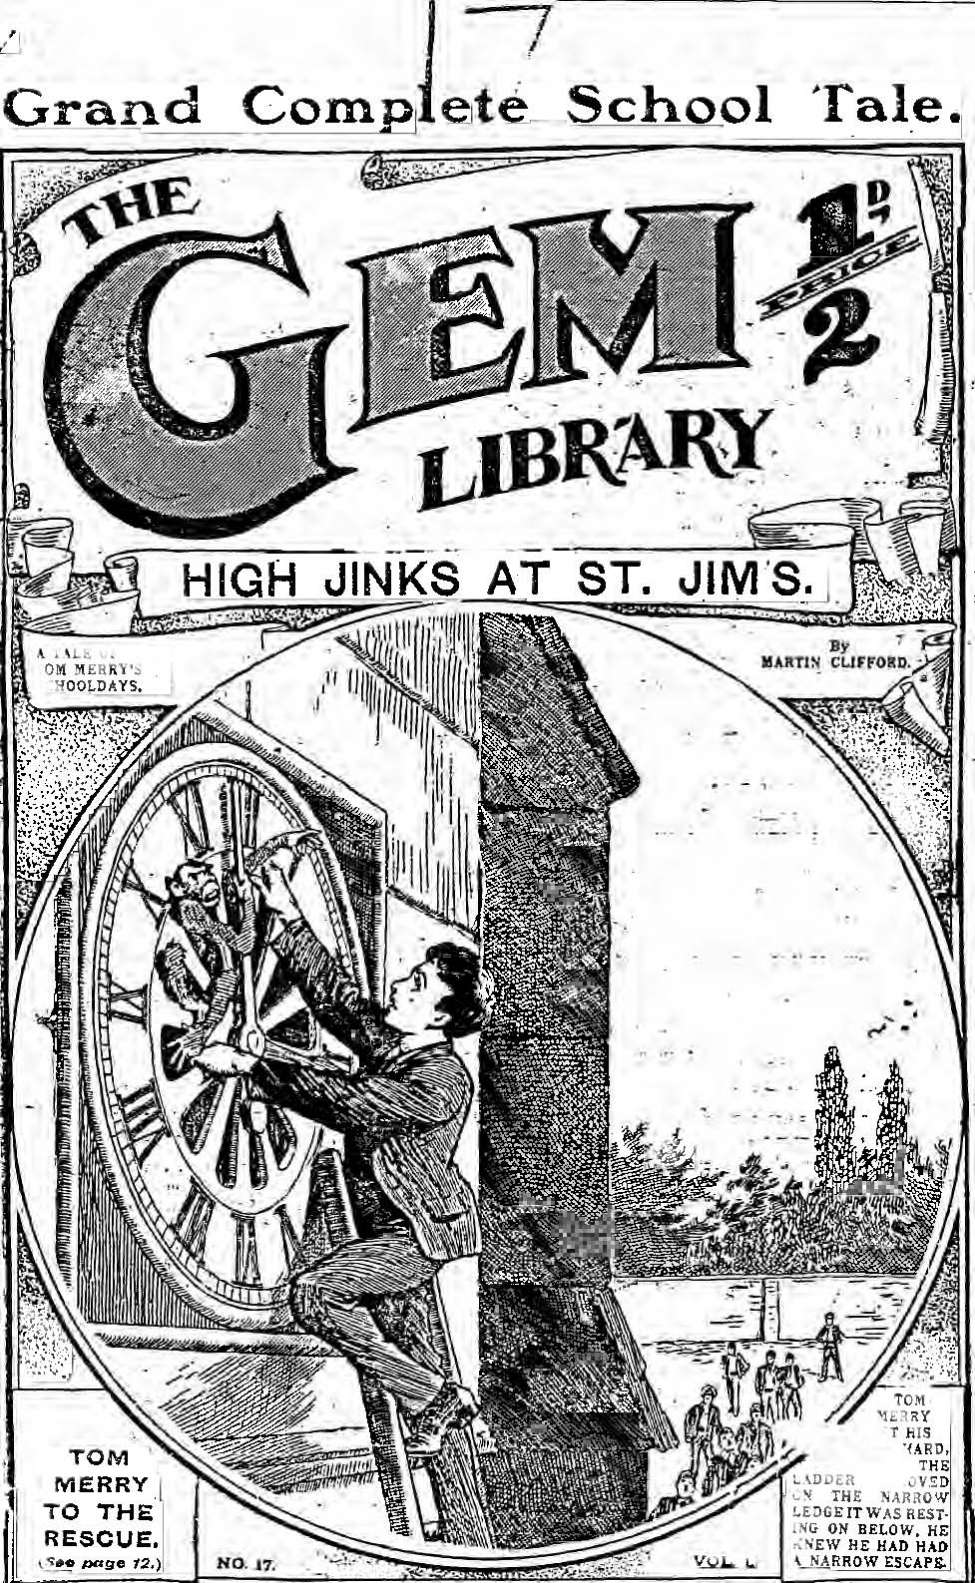 Comic Book Cover For The Gem v1 17 - High Jinks at St. Jim’s